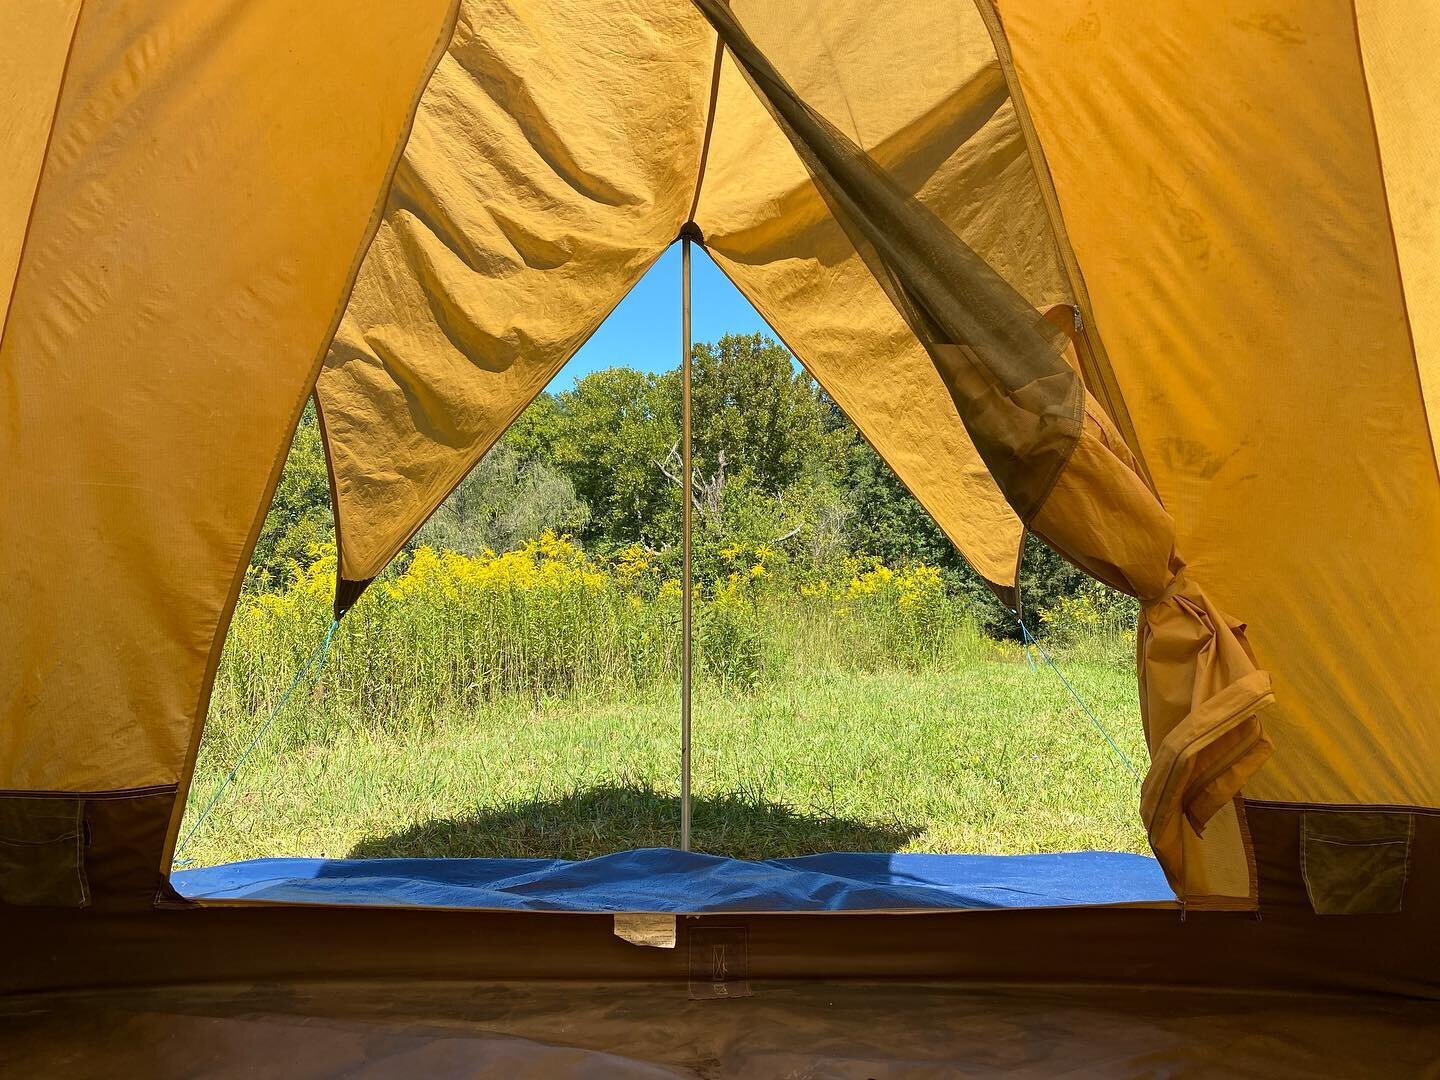 No Frills Pre Fix Camping &mdash; who&rsquo;s into it?!
.
We are setting up camp just for you. This cool vintage LLBean Eureka and you! (Plus a queen air mattress and maybe a treat basket of local goodies) &mdash; she isn&rsquo;t listed yet but conta